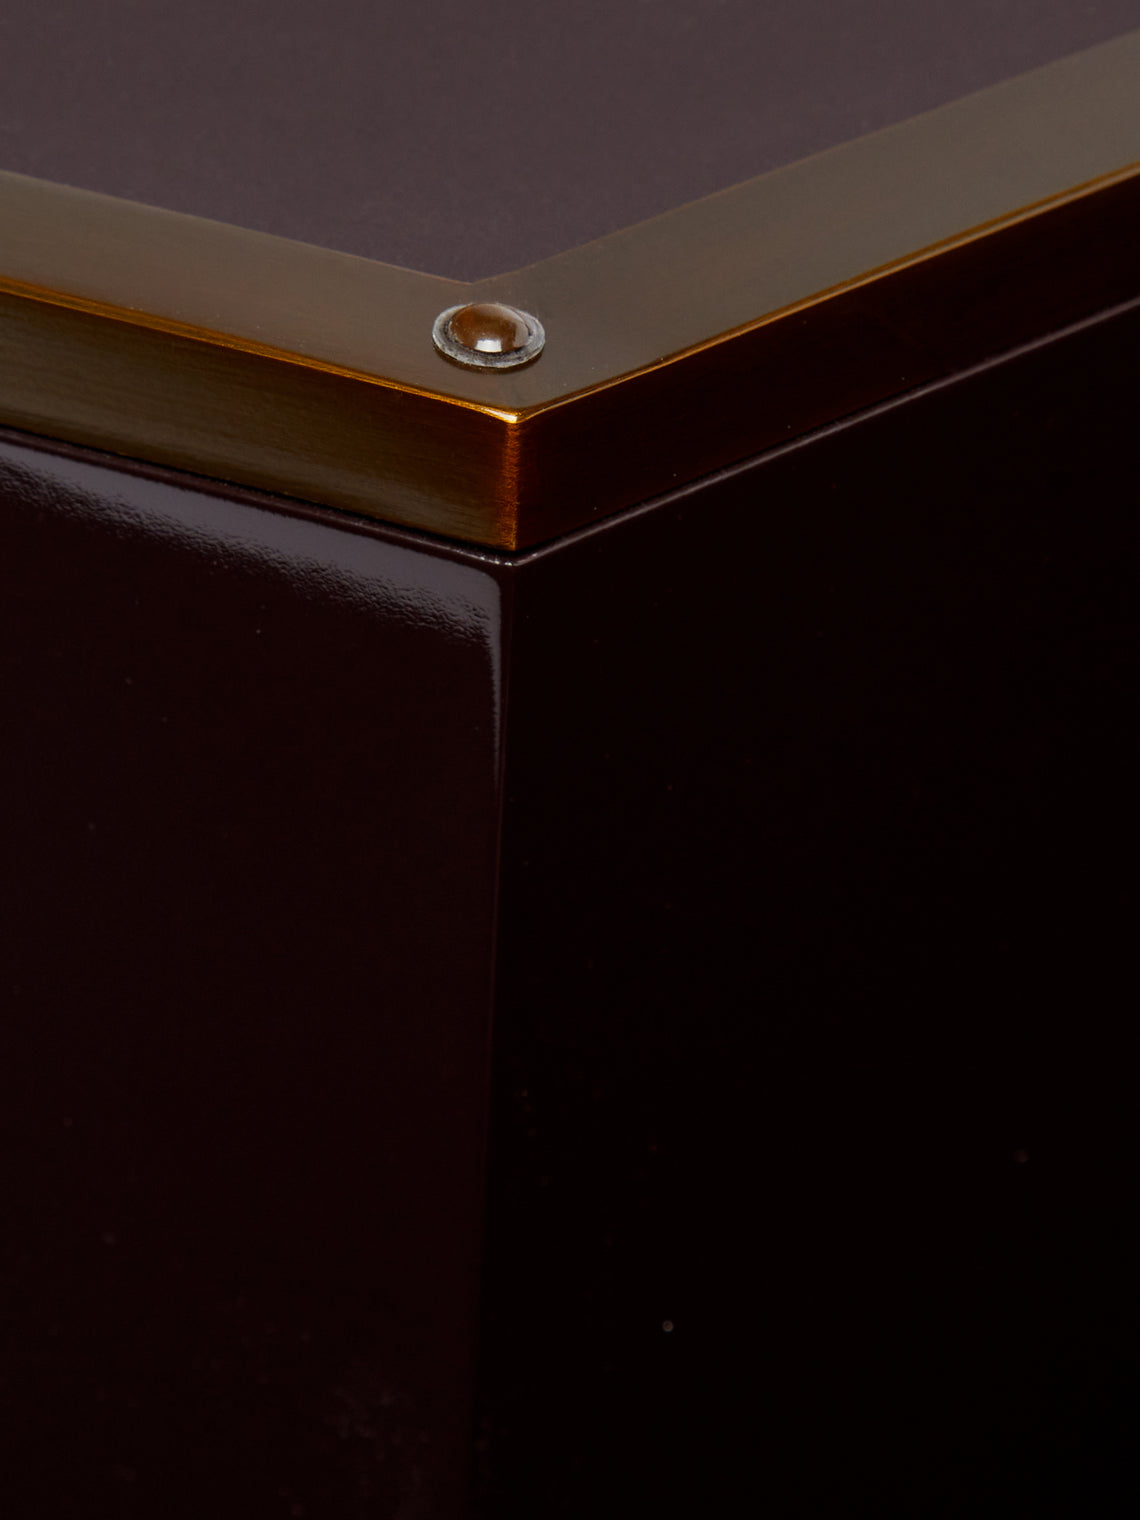 The Lacquer Company - Lacquered Hexagonal Bin -  - ABASK